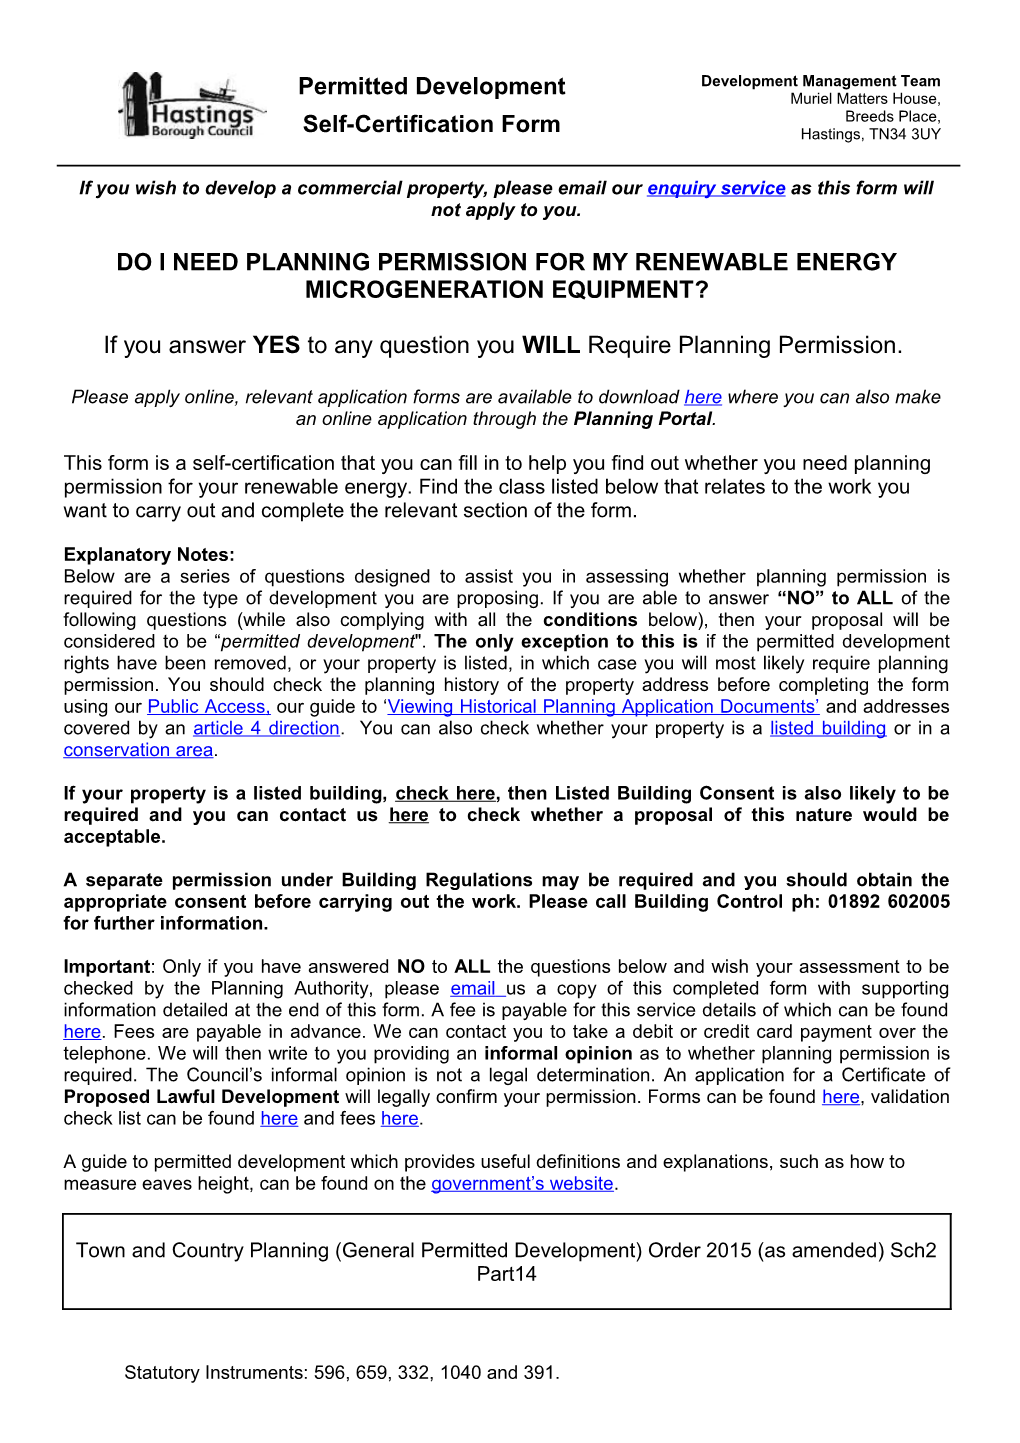 Do I Need Planning Permission for My Renewable Energy Microgeneration Equipment?